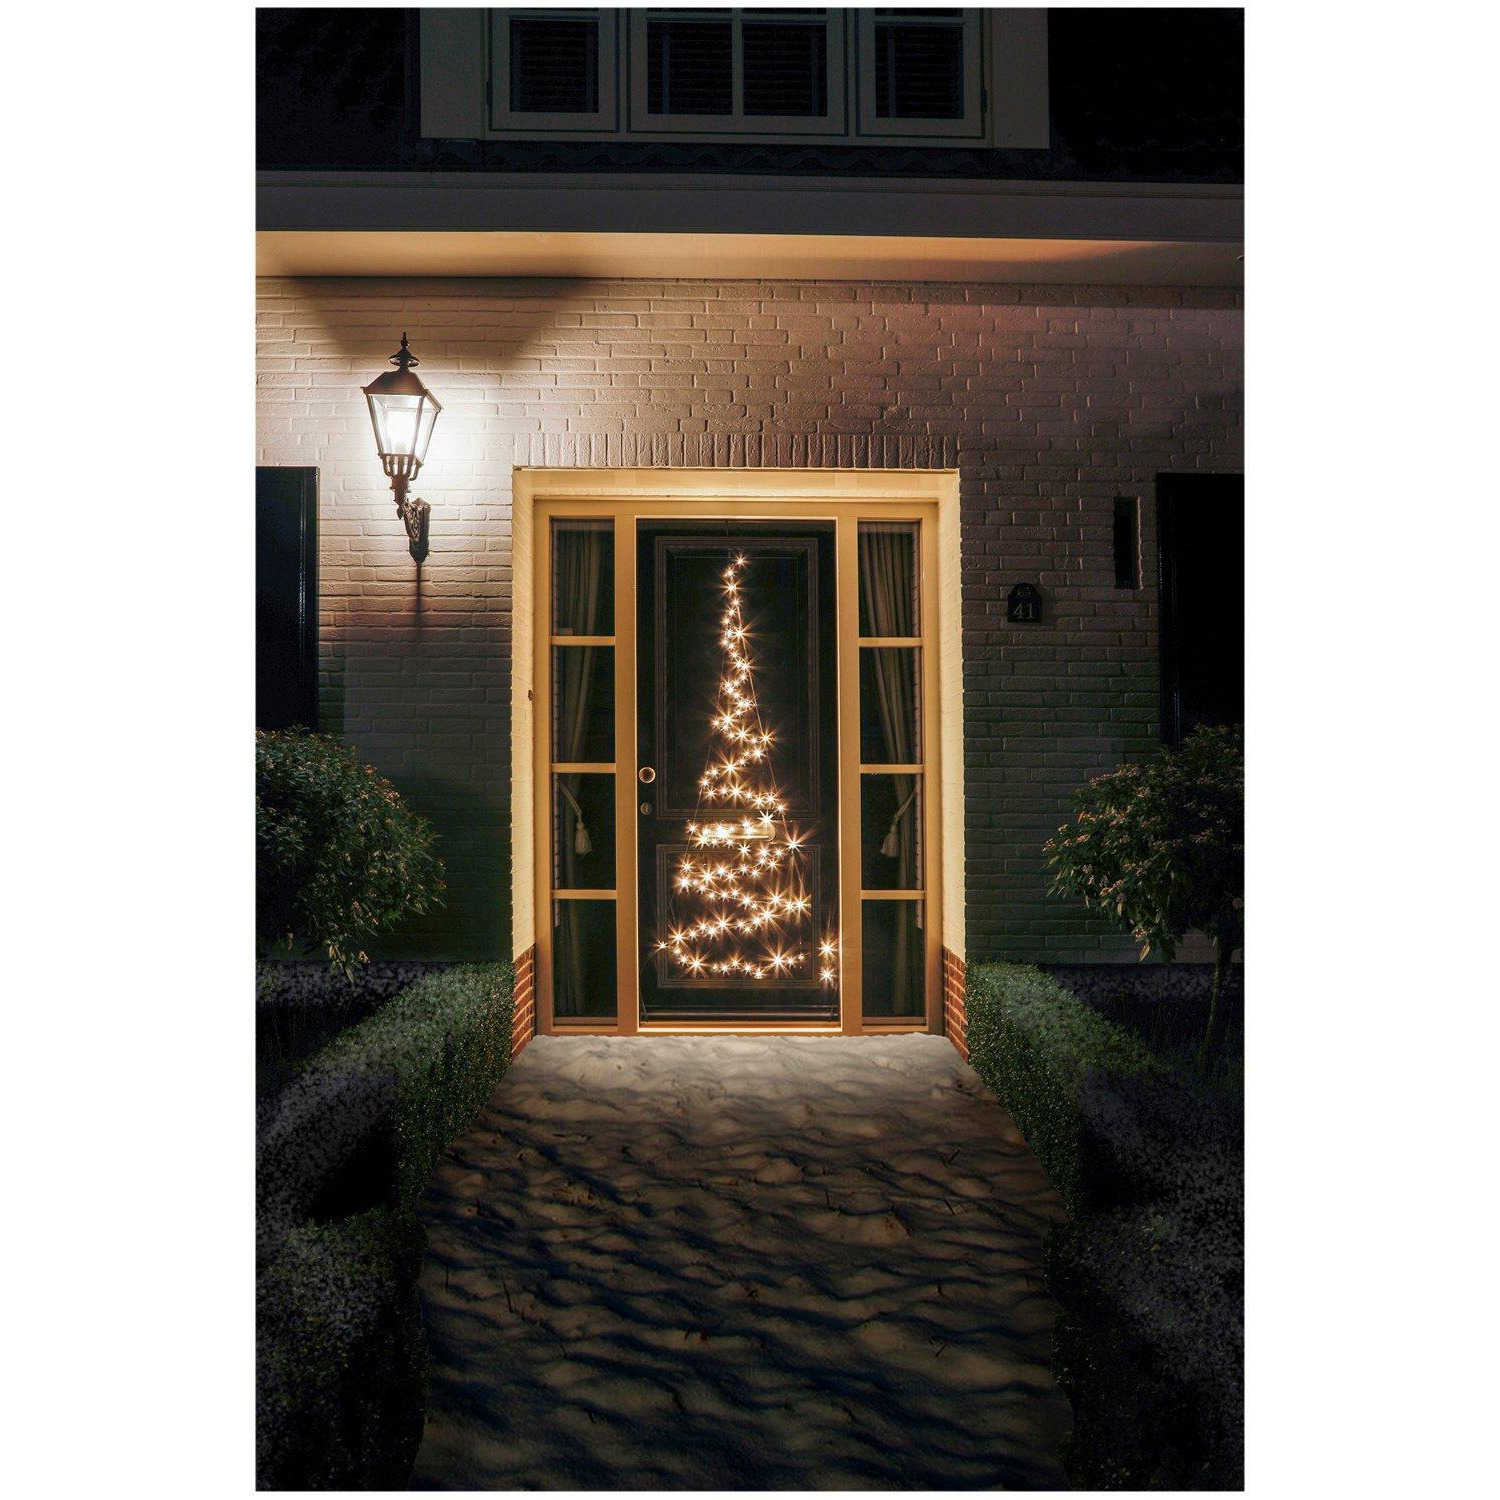 Door Tree with Twinkling Lights - 120 LED lights create a beautifully illuminated Christmas tree on your door - image 1